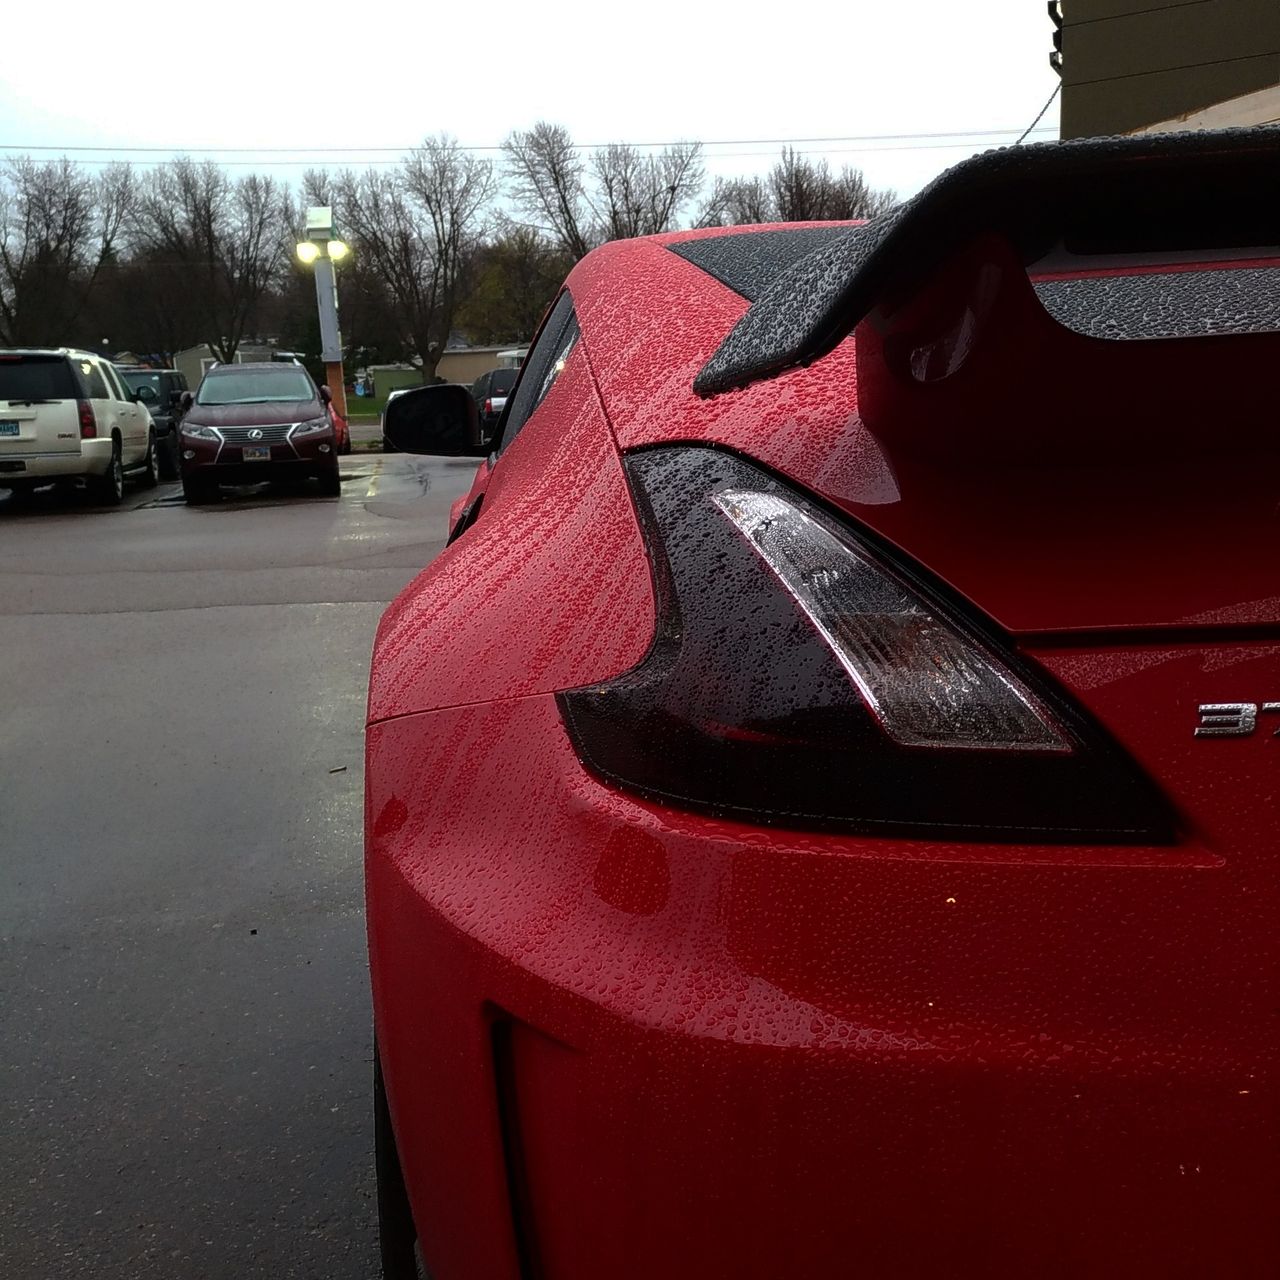 2014 Nissan 370Z NISMO | Sioux Falls, SD, Solid Red (Red & Orange), Rear Wheel